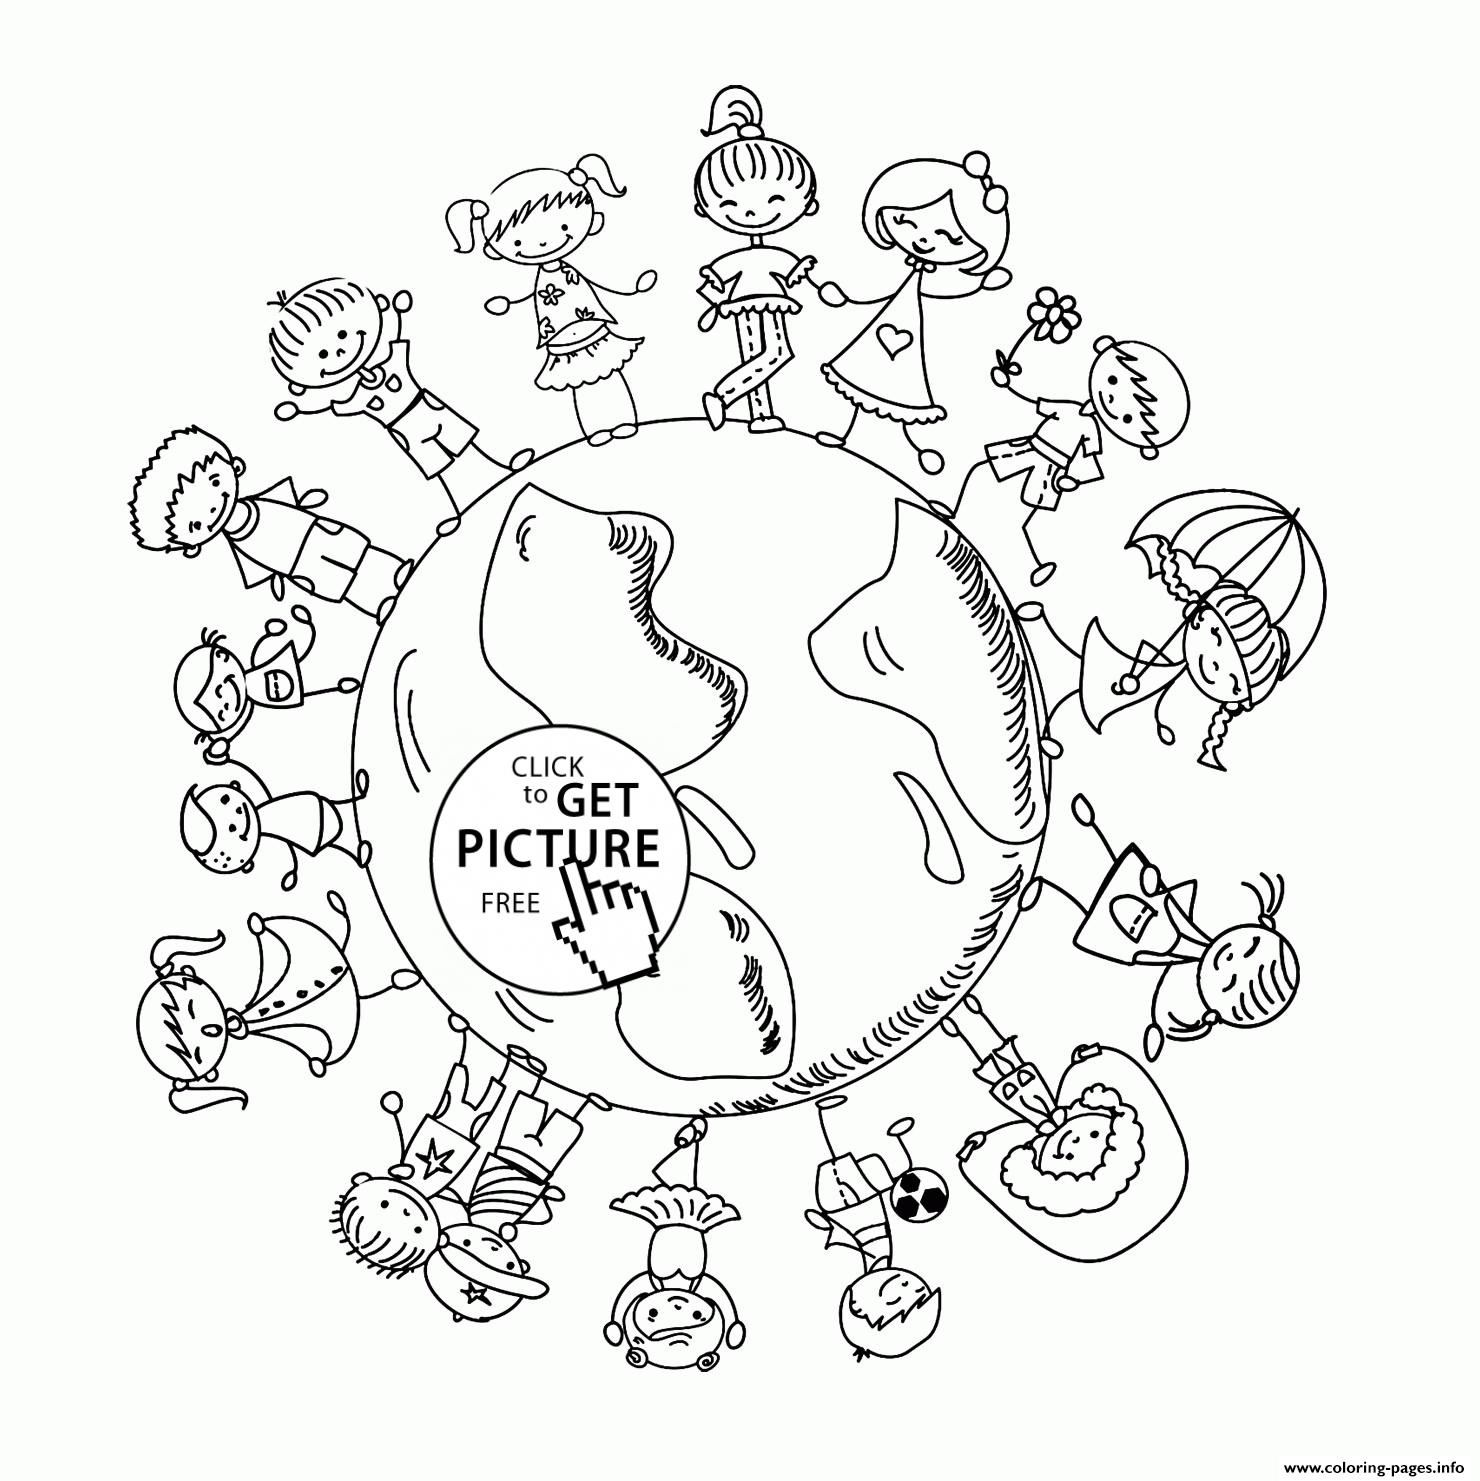 Happy Kids On Earth Day coloring